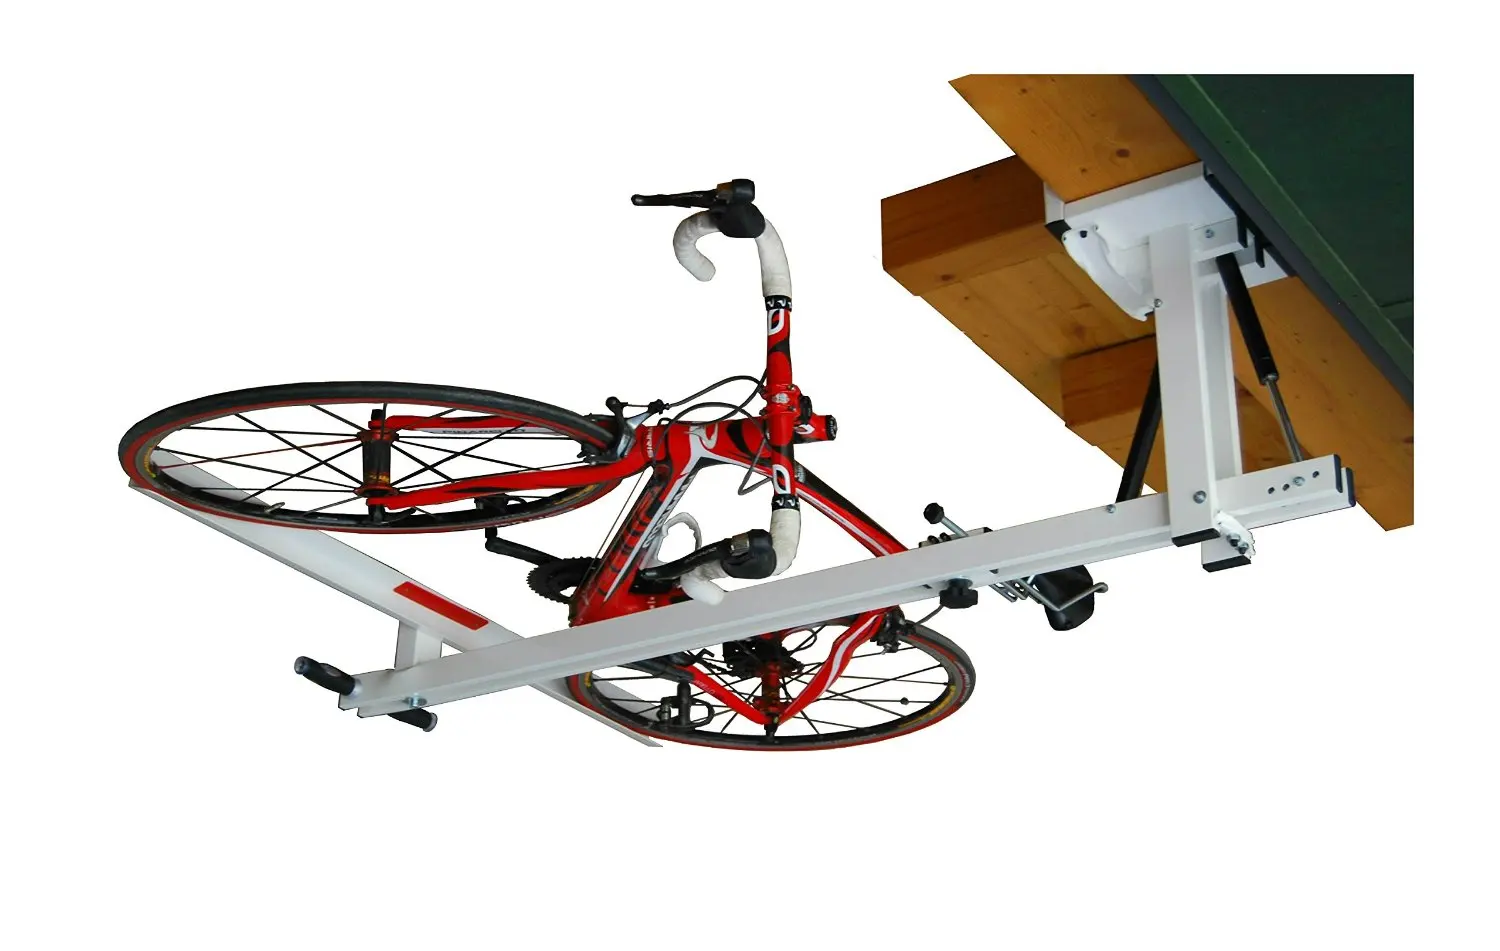 Buy flat-bike-lift - The new overhead rack to store the ...